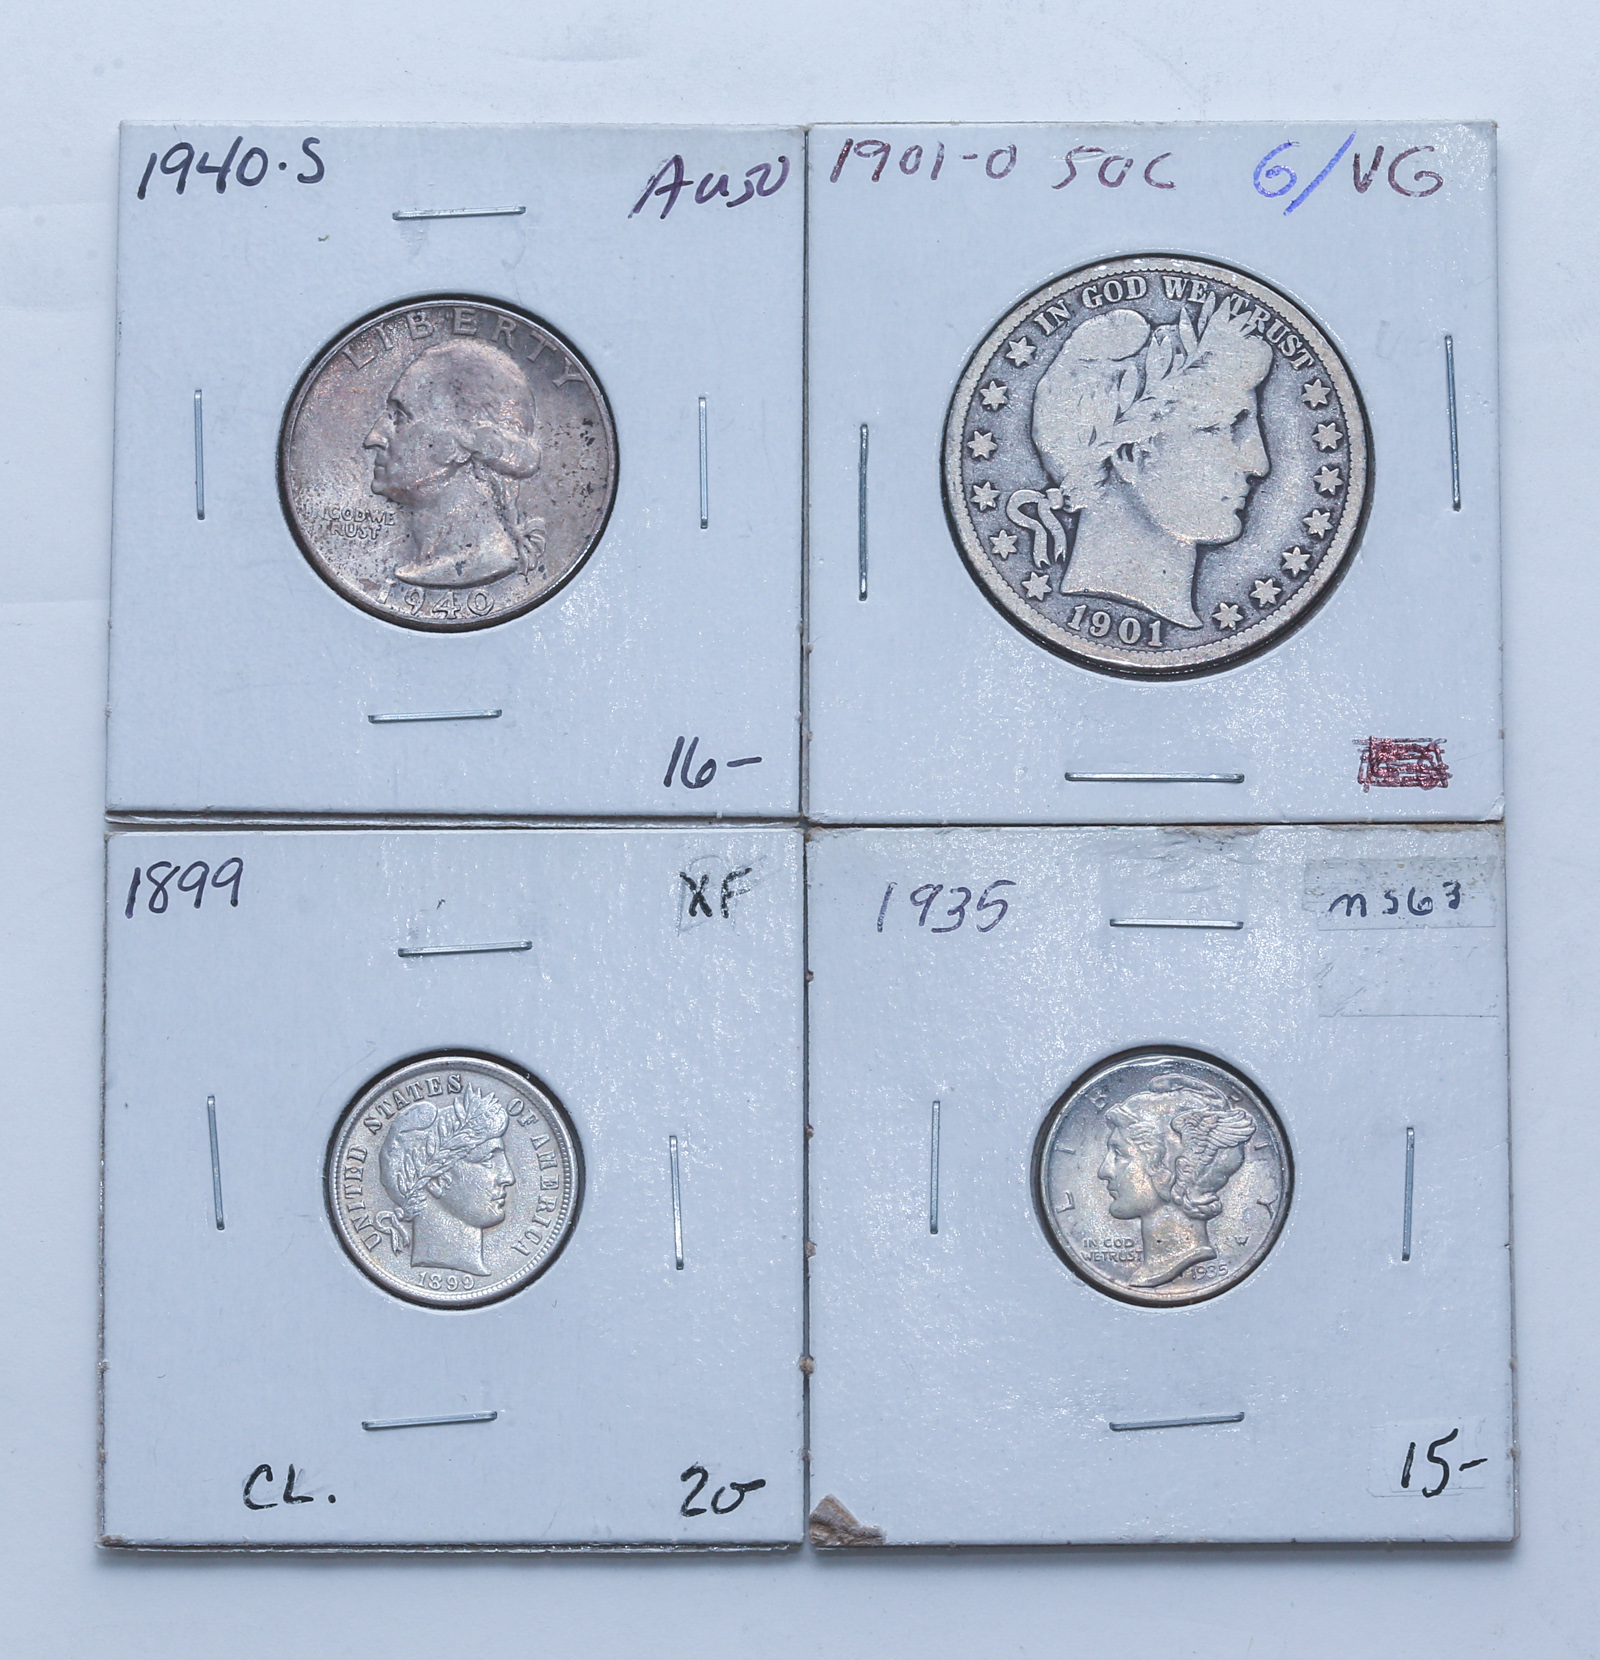 FOUR US TYPE COINS, 1899-1940 1899